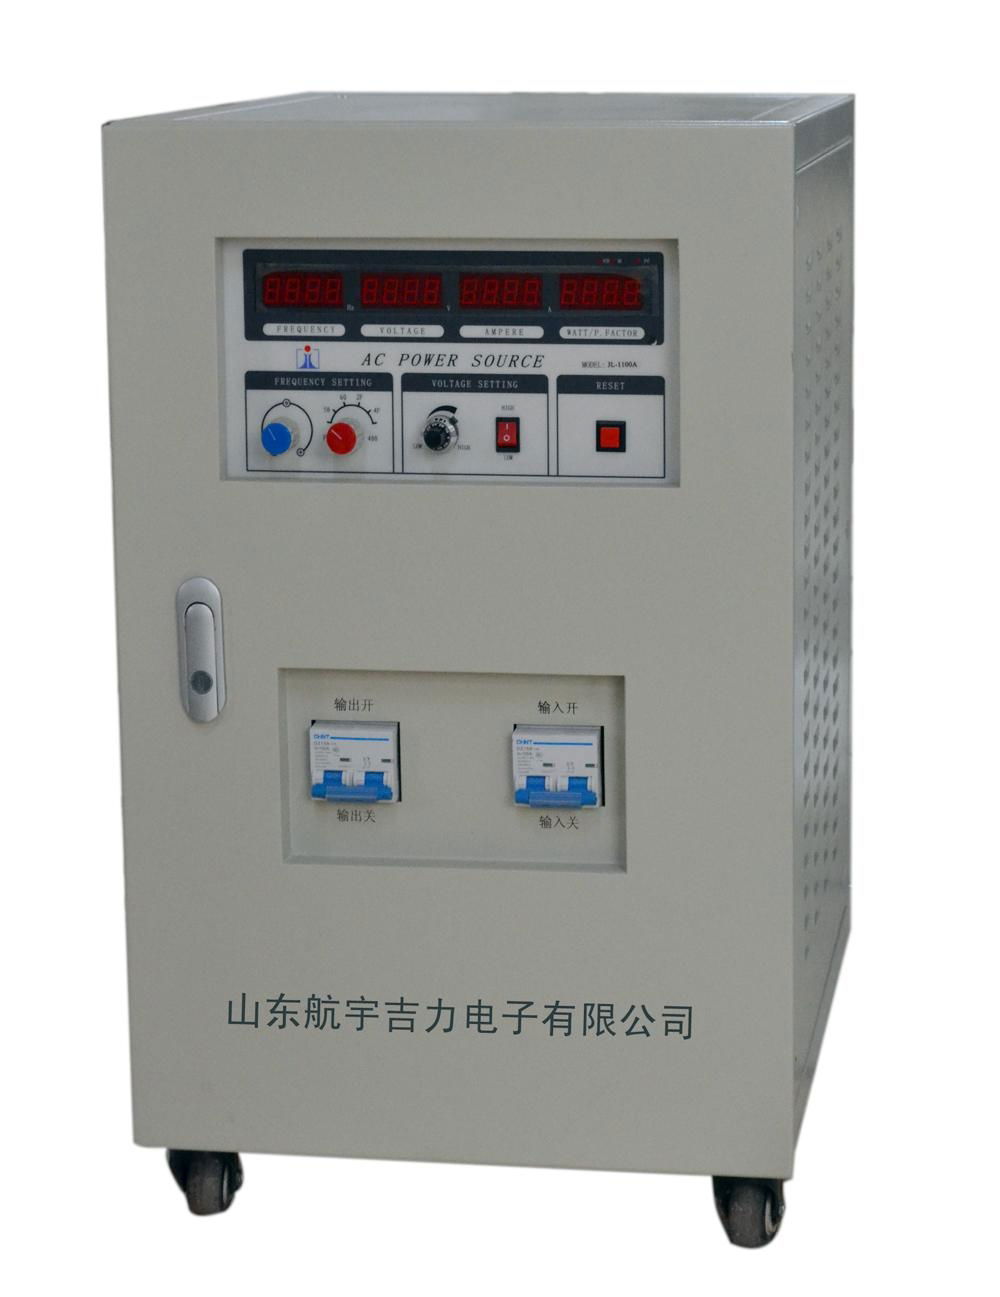 10KVA Variable Frequency Power Supply